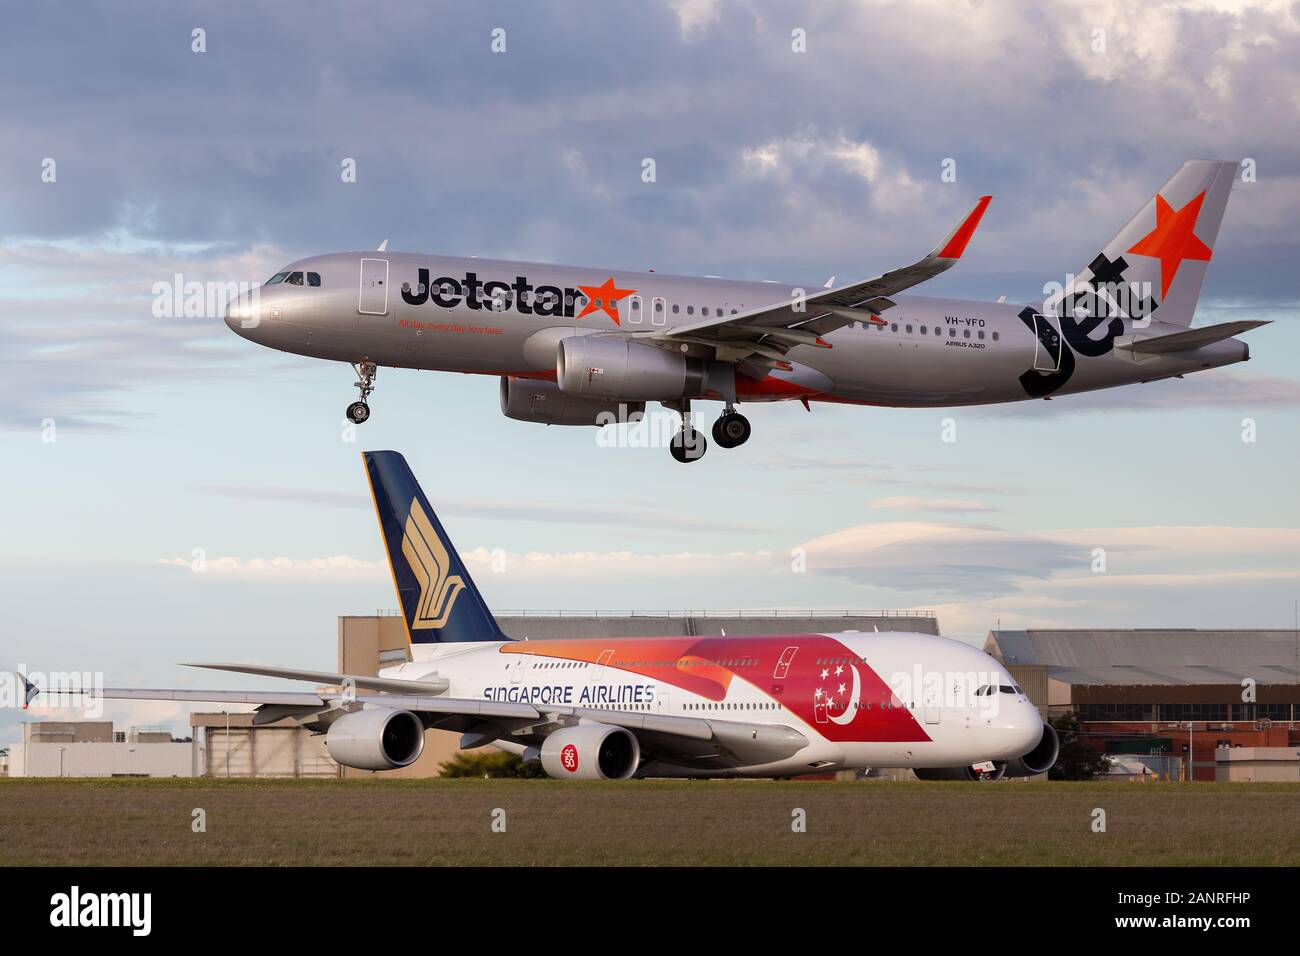 Jetstar airways Airbus A320 about to land at Melbourne Airport while a  Singapore Airlines Airbus A380 waits to takeoff Stock Photo - Alamy